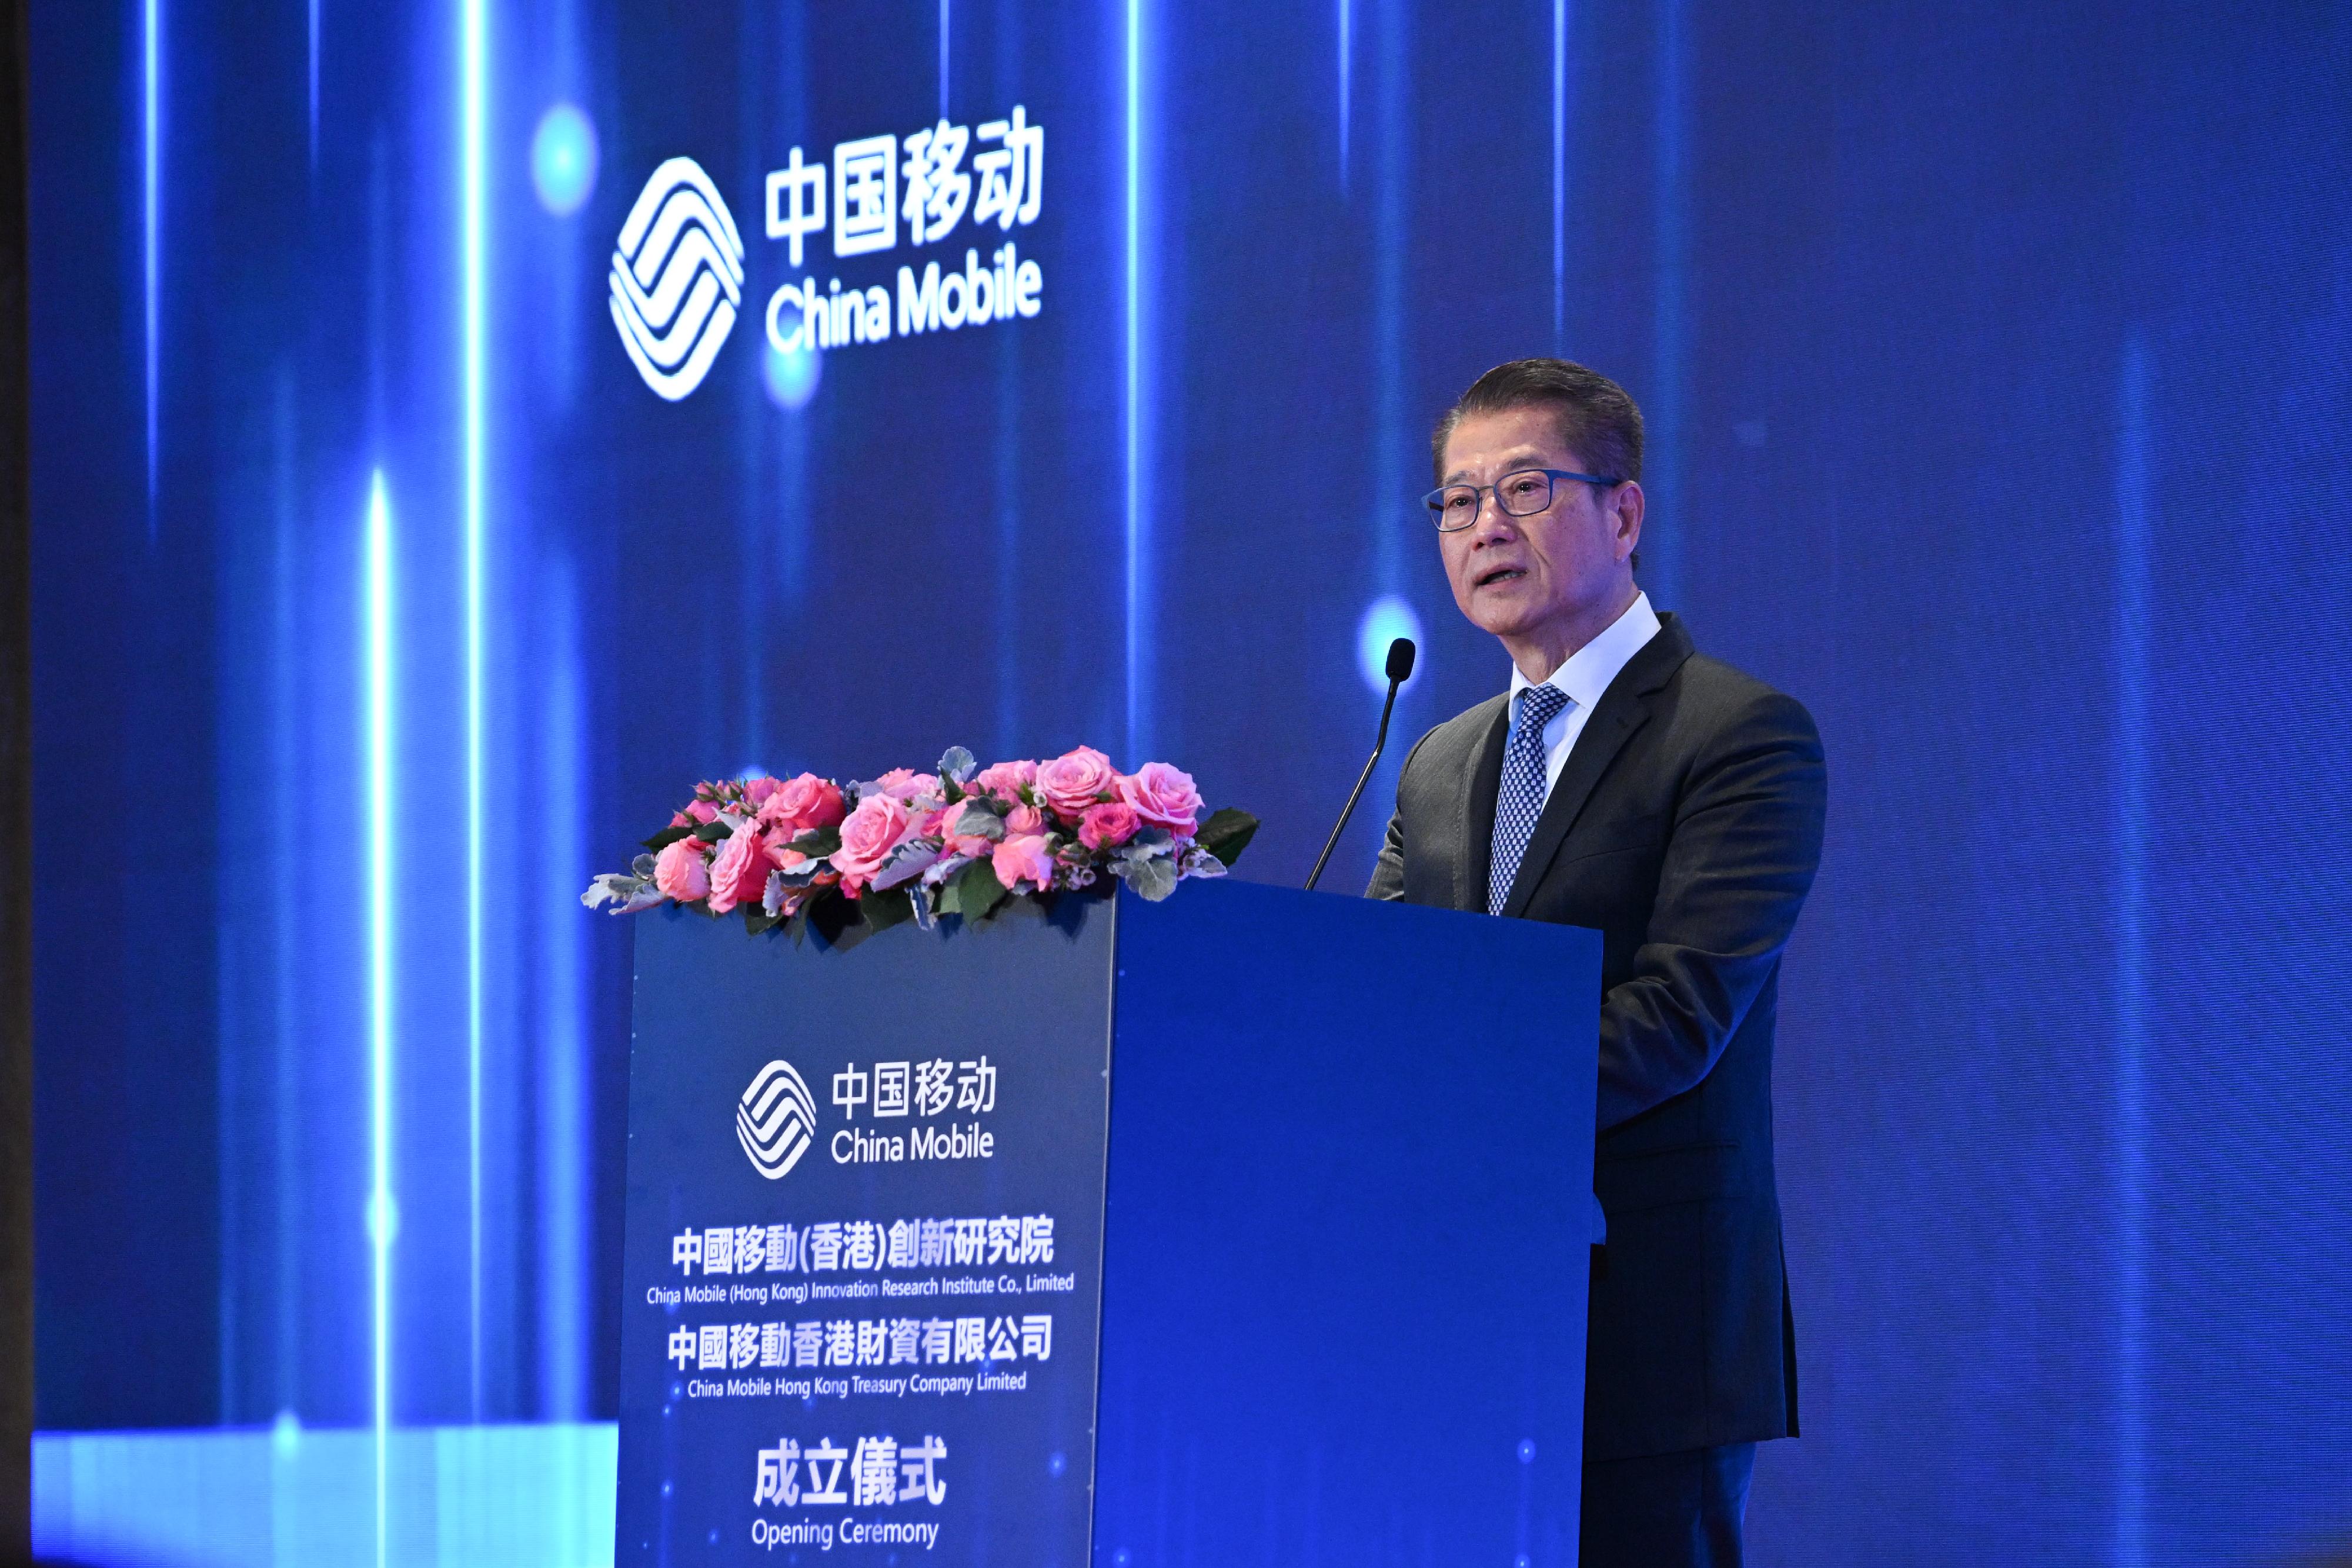 The Financial Secretary, Mr Paul Chan, speaks at the China Mobile (Hong Kong) Innovation Research Institute Co., Limited and China Mobile Hong Kong Treasury Company Limited Opening Ceremony today (March 22).